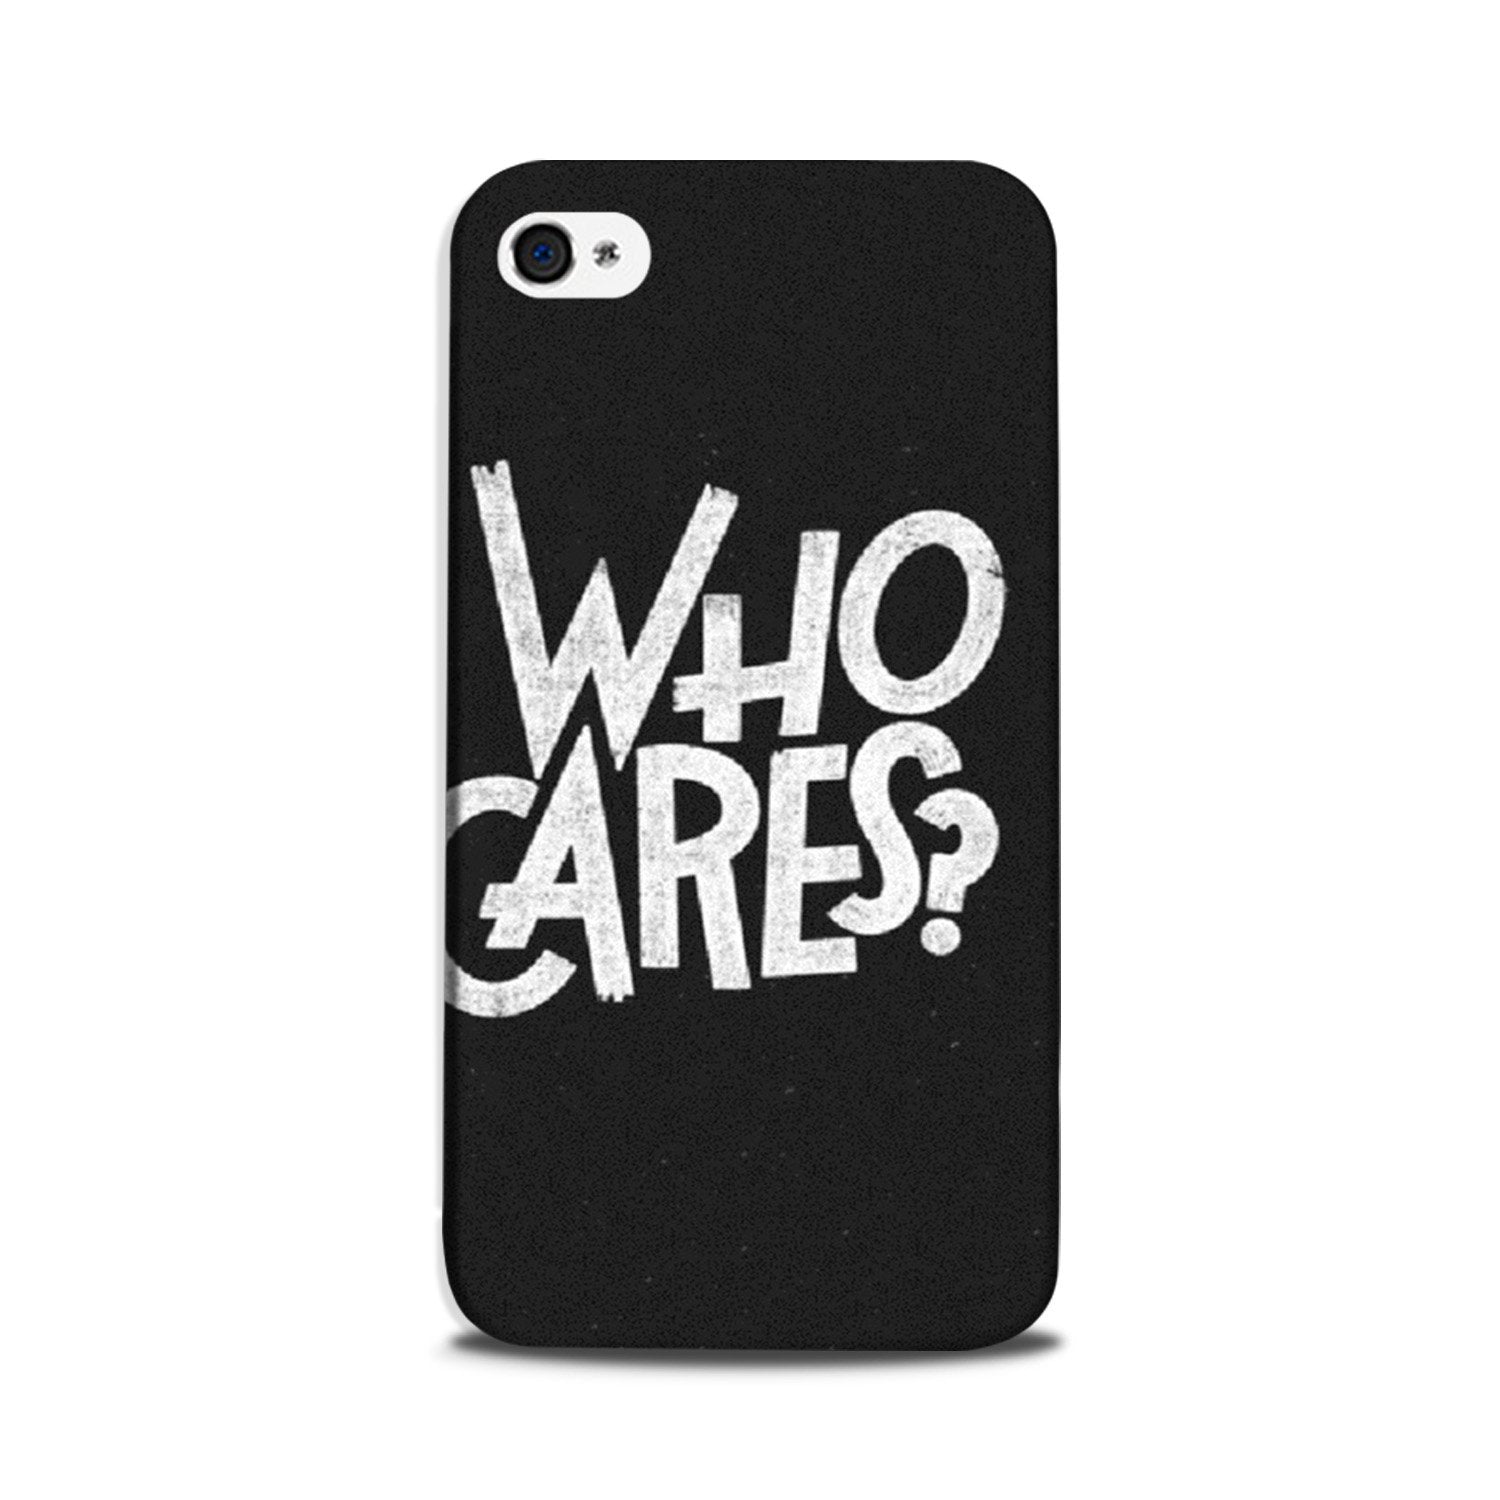 Who Cares Case for iPhone 5/ 5s